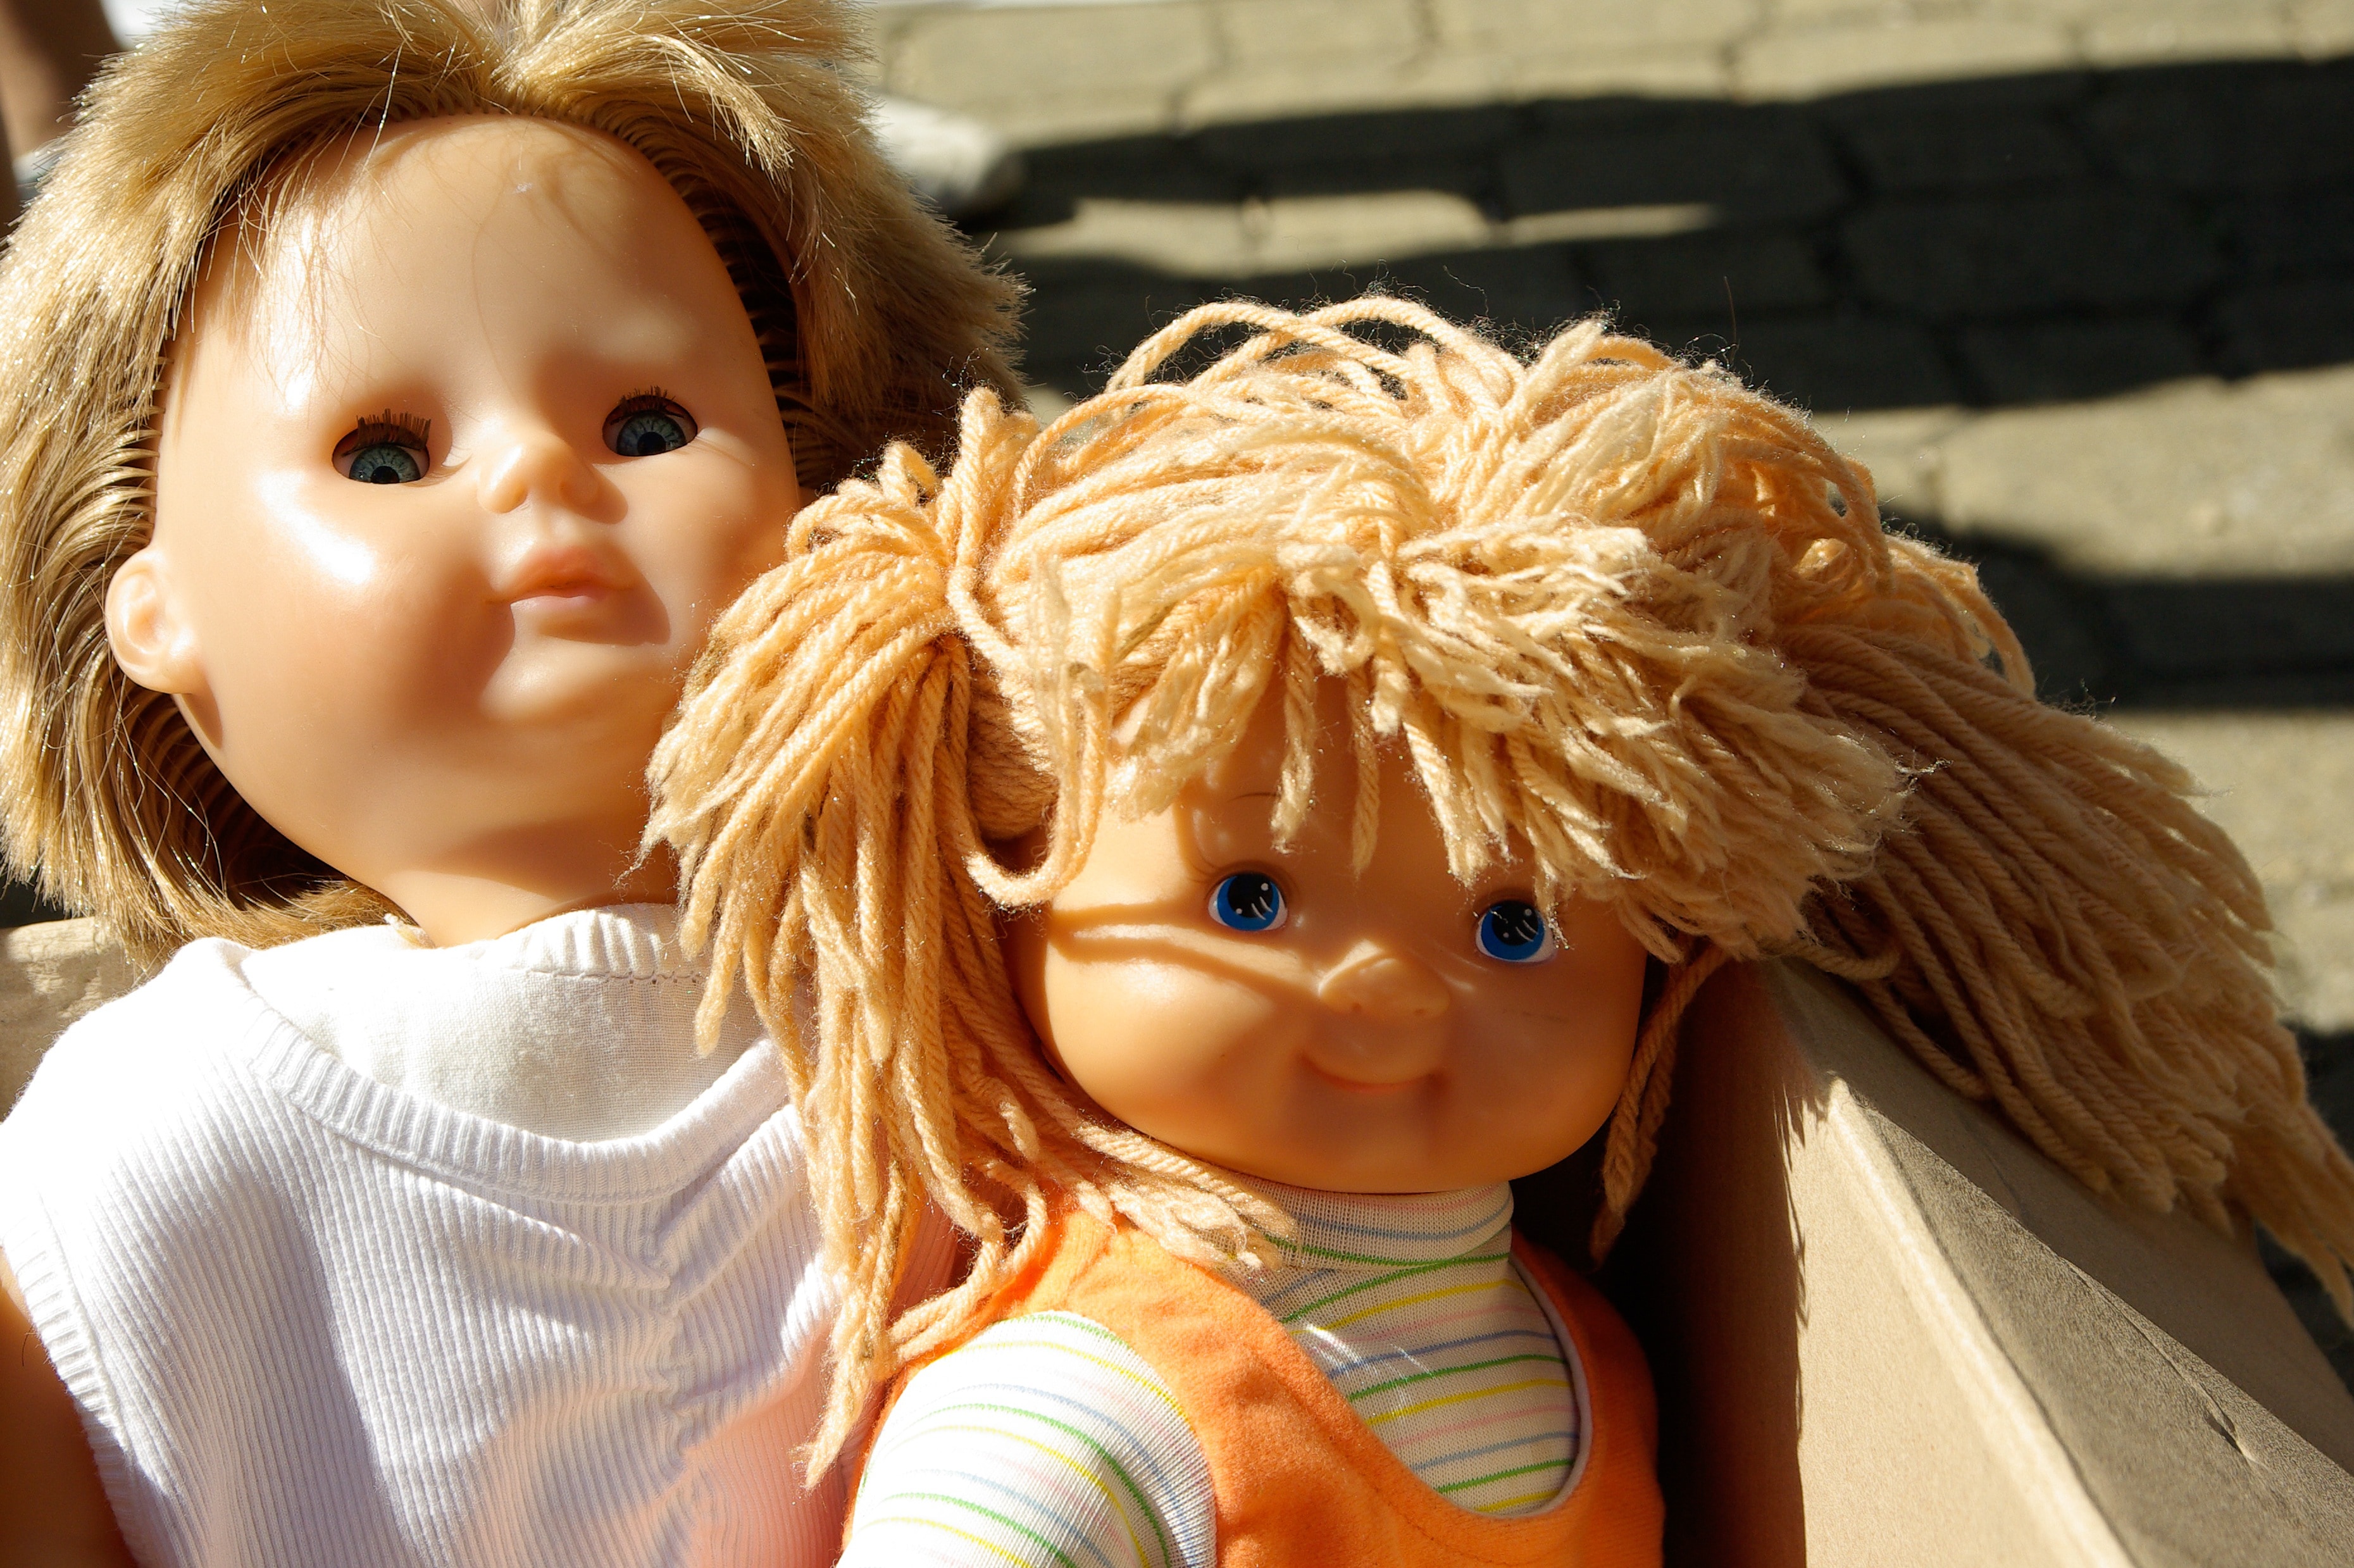 two toddler dolls in a box